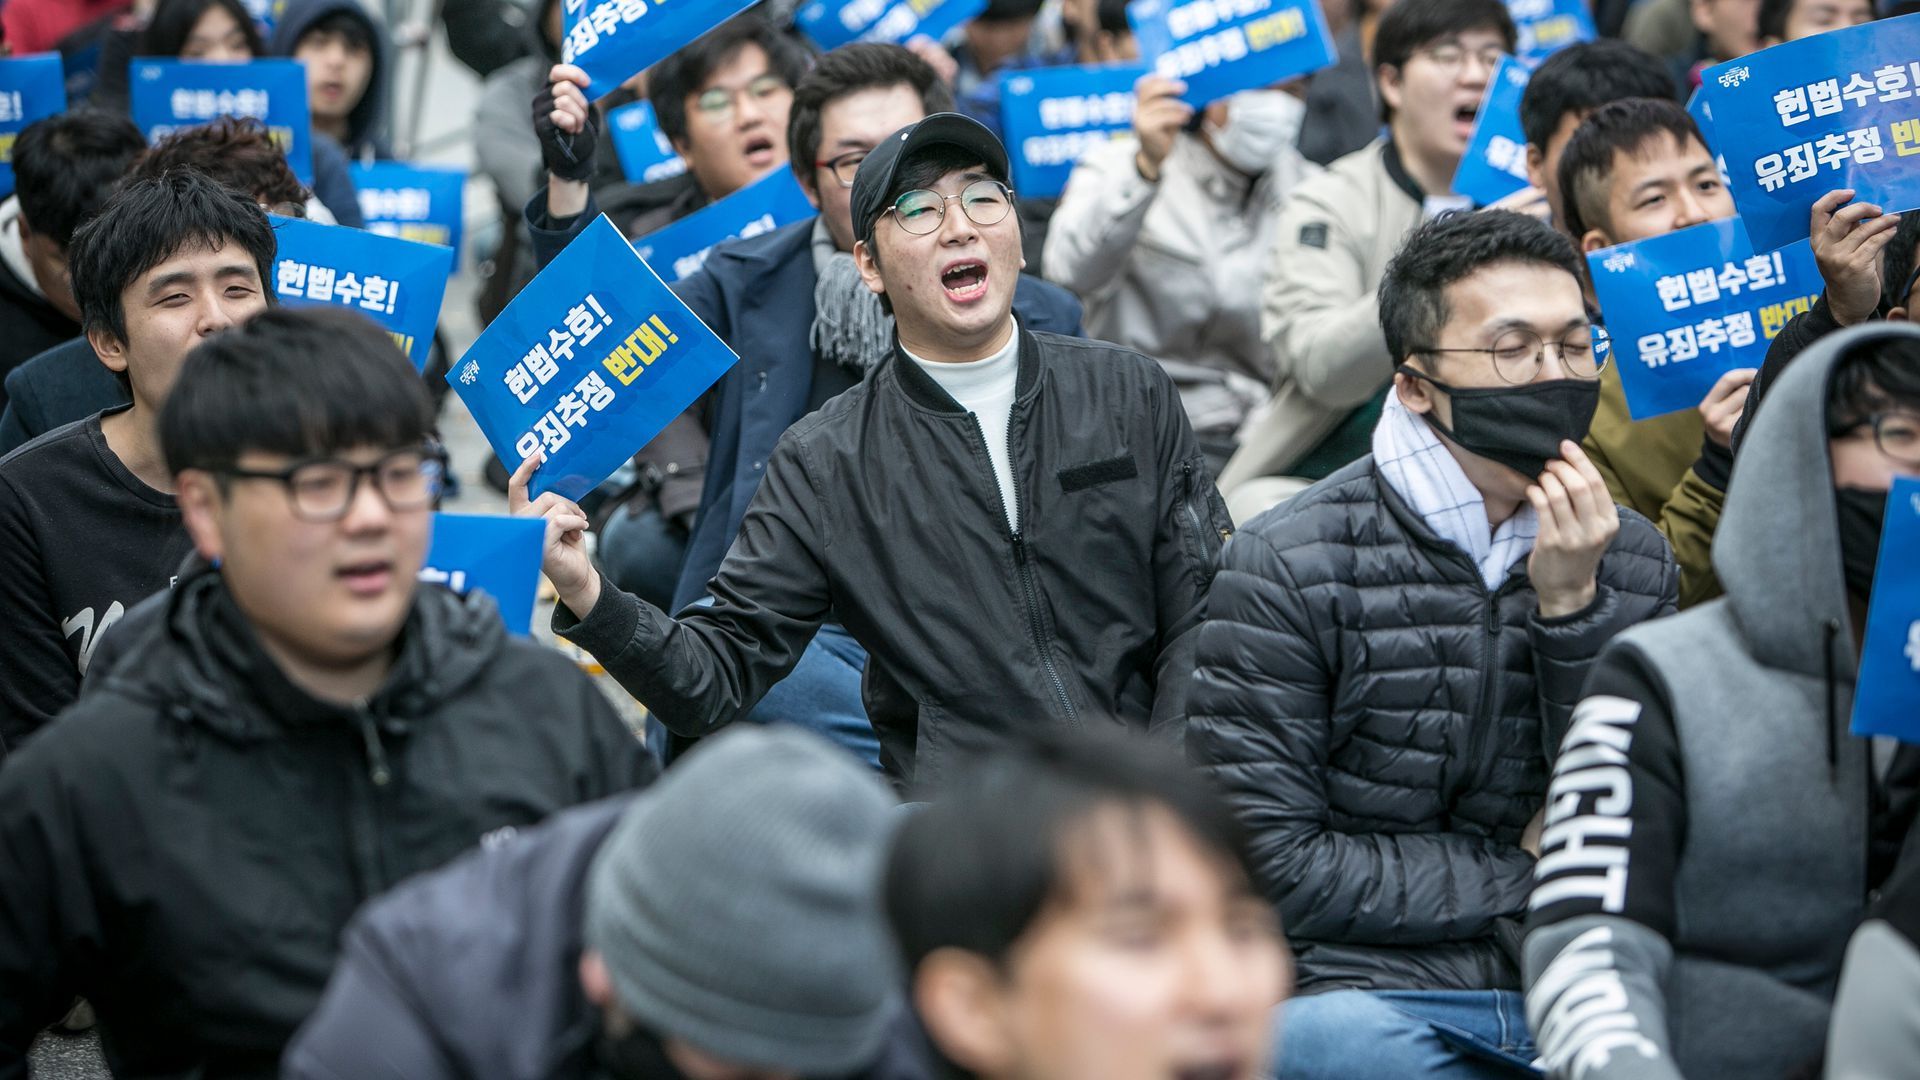 An anti-feminism protest in Seoul in October 2021. Photo: Jean Chung/Getty Images